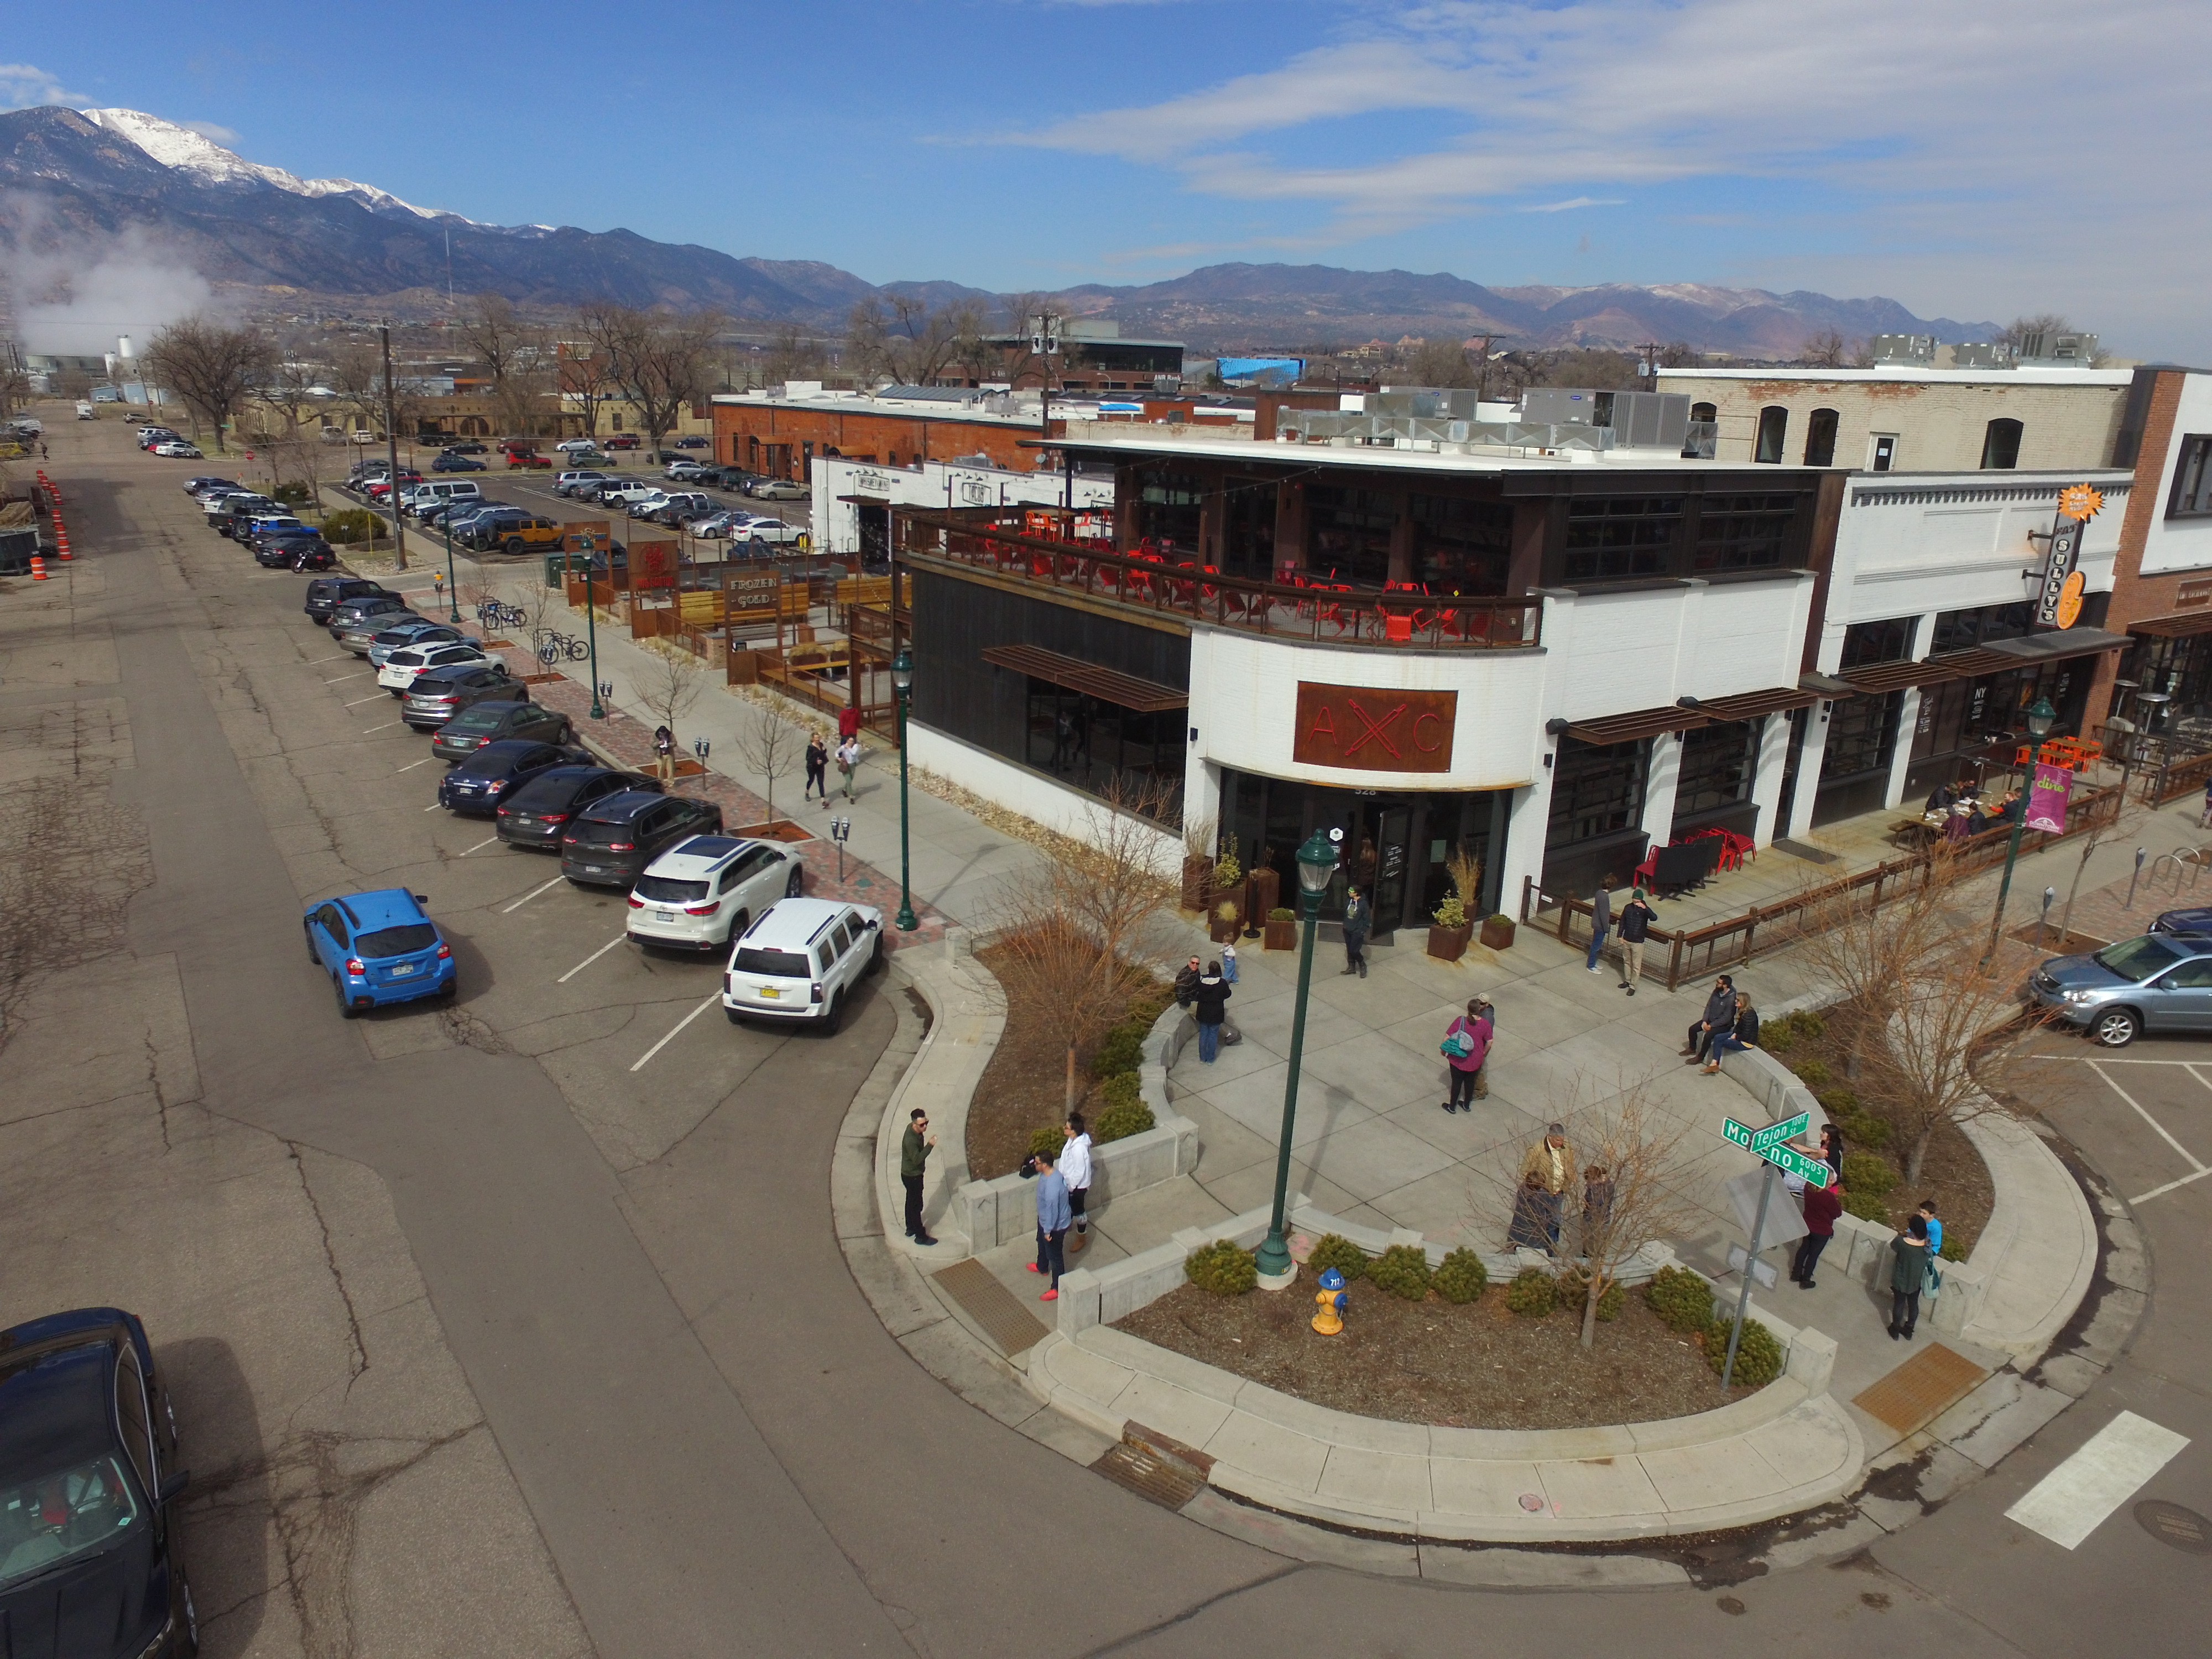 South Tejon revitalization brings in more crowds than usual